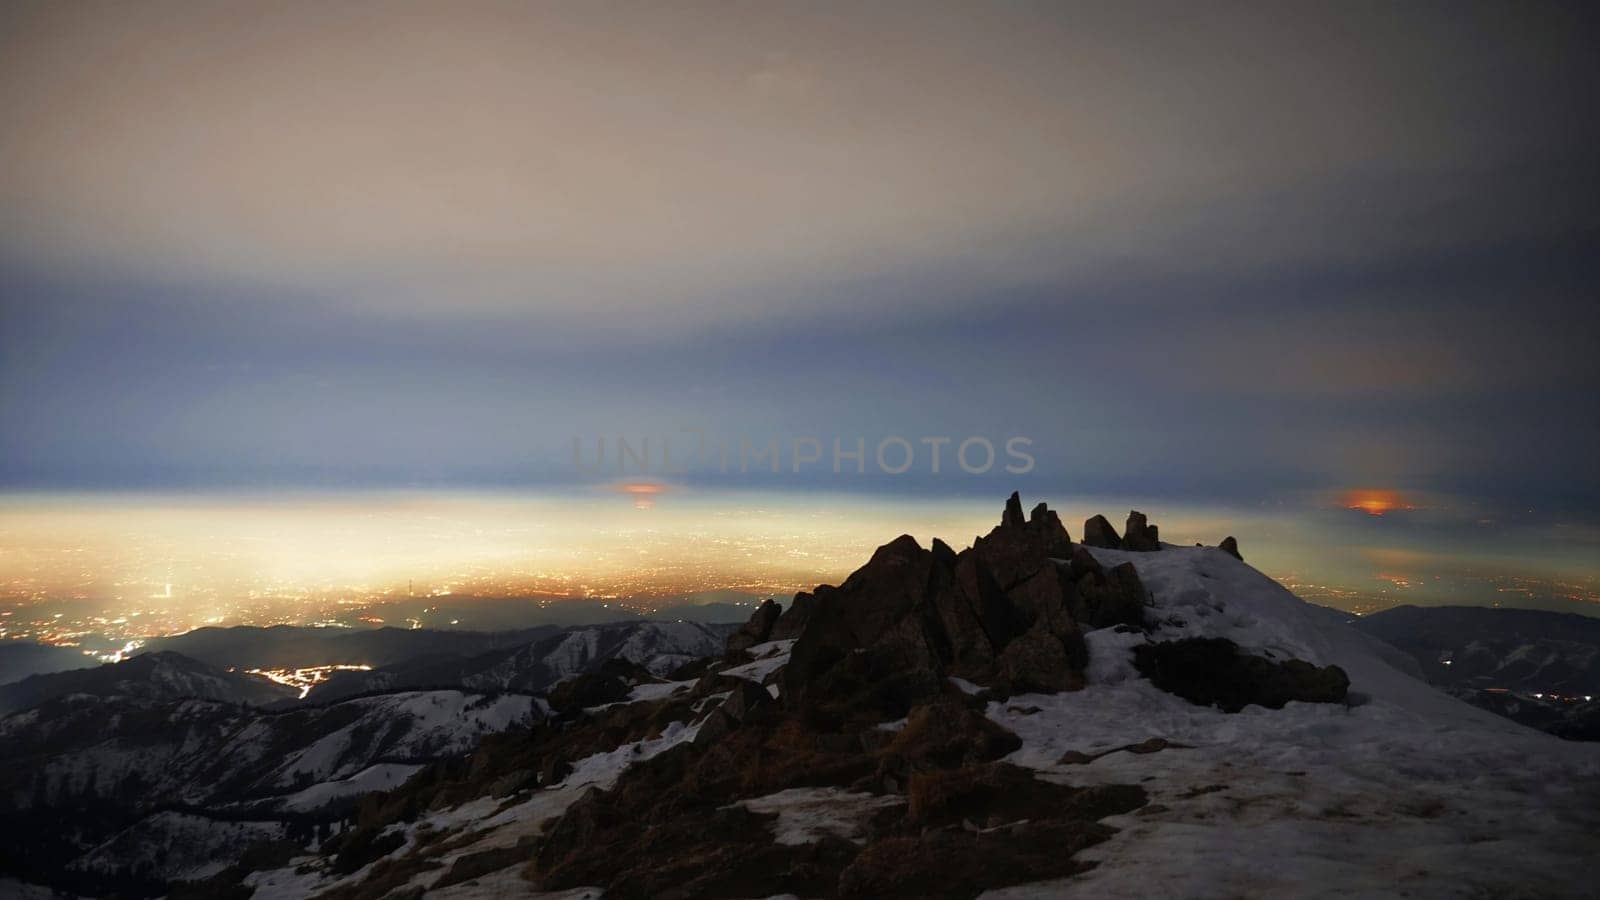 View of the night city from the snowy mountains by Passcal